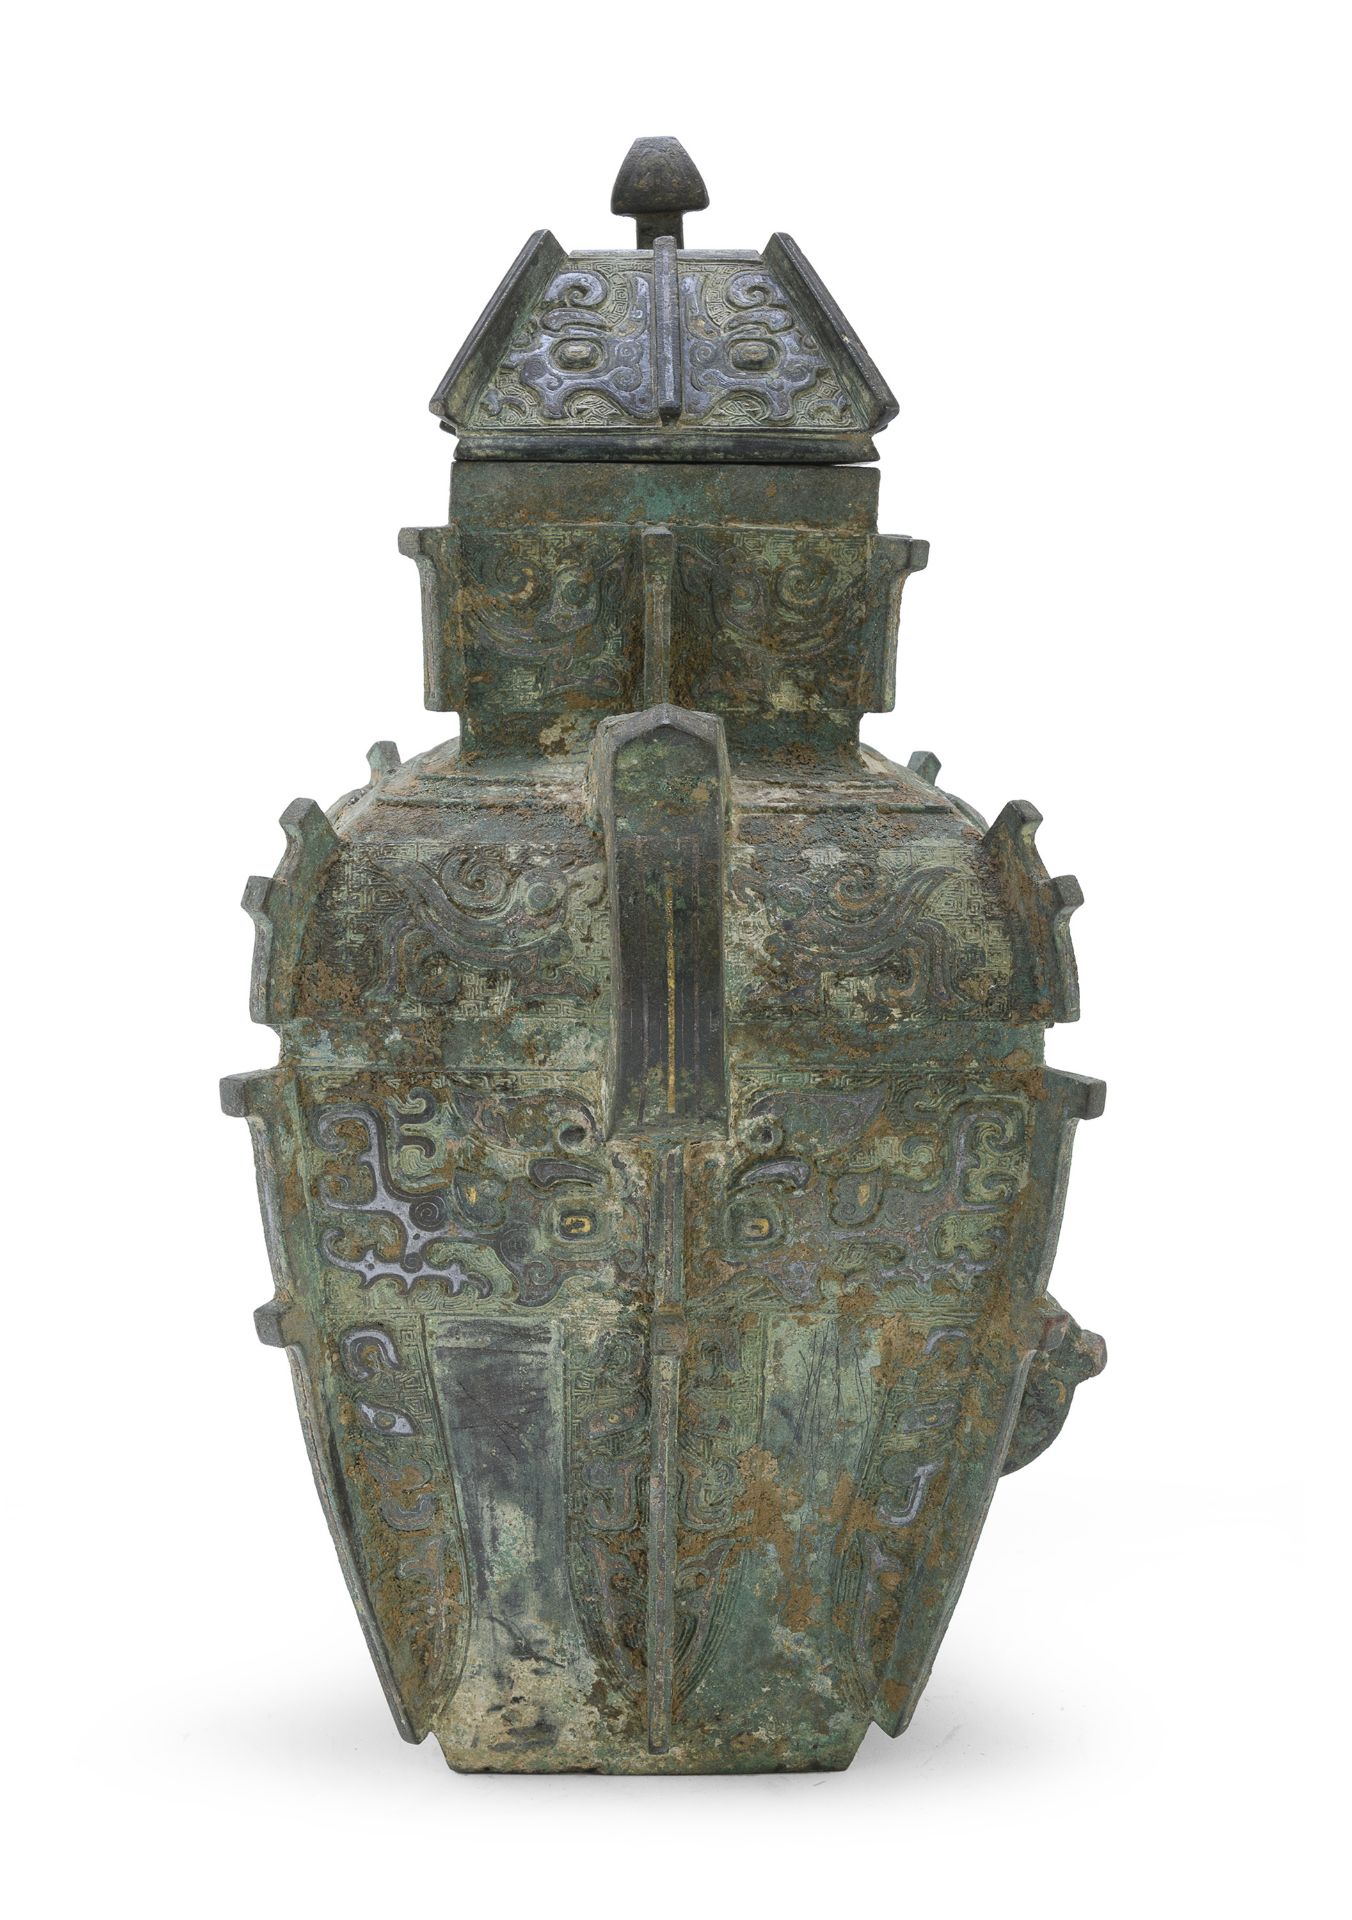 A RARE CHINESE BRONZE VASE 12TH - 13TH CENTURY. - Image 2 of 7